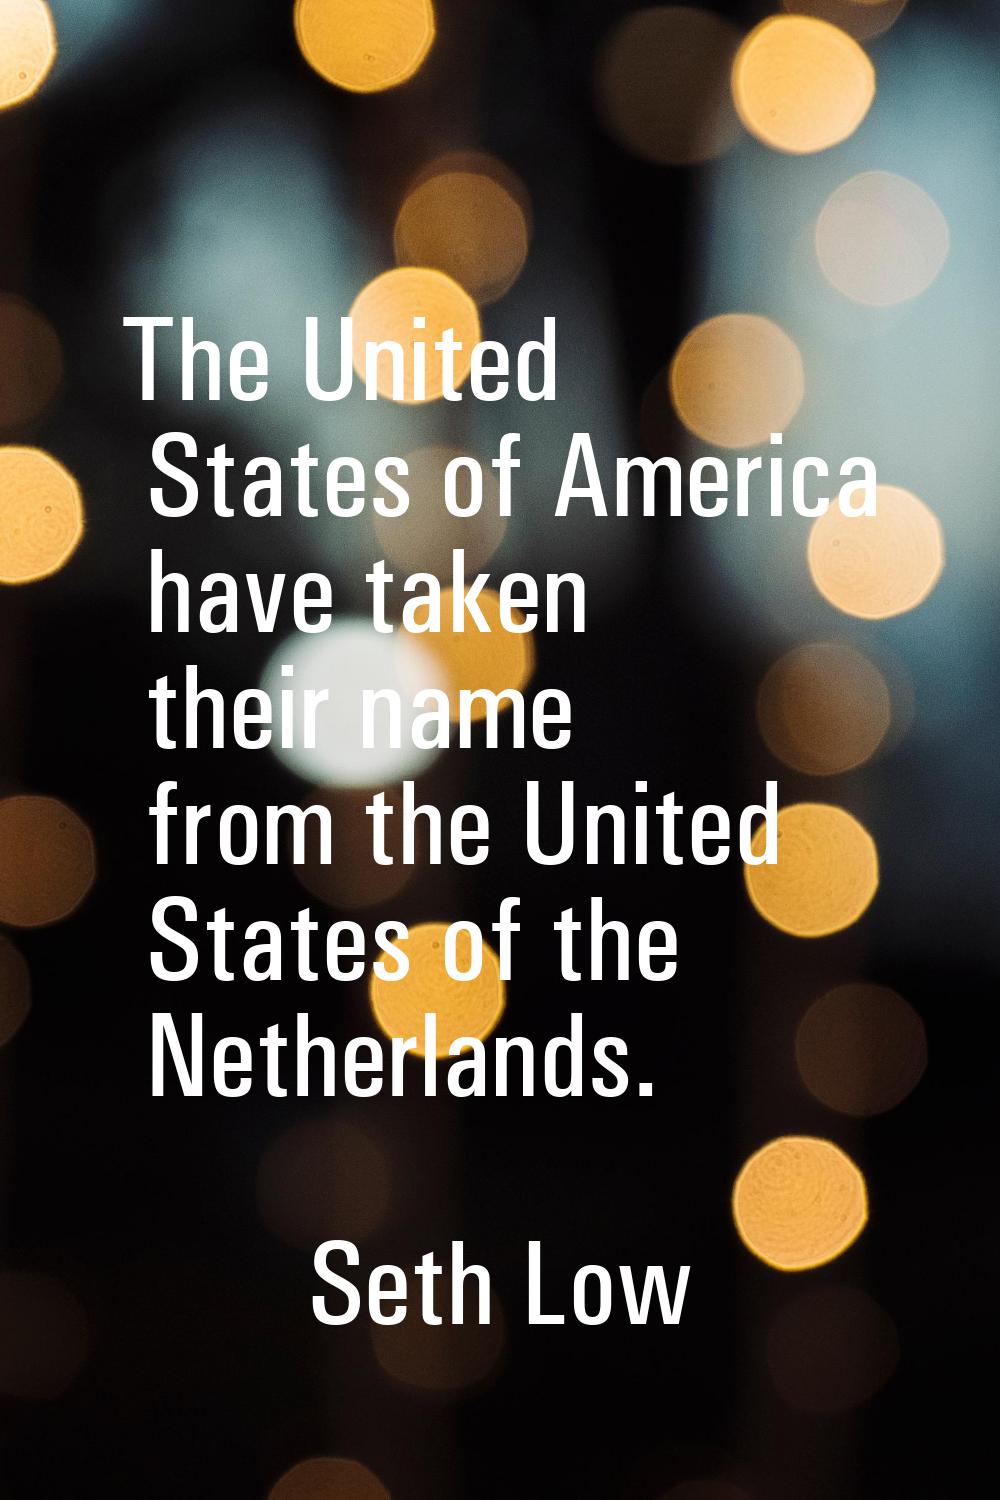 The United States of America have taken their name from the United States of the Netherlands.